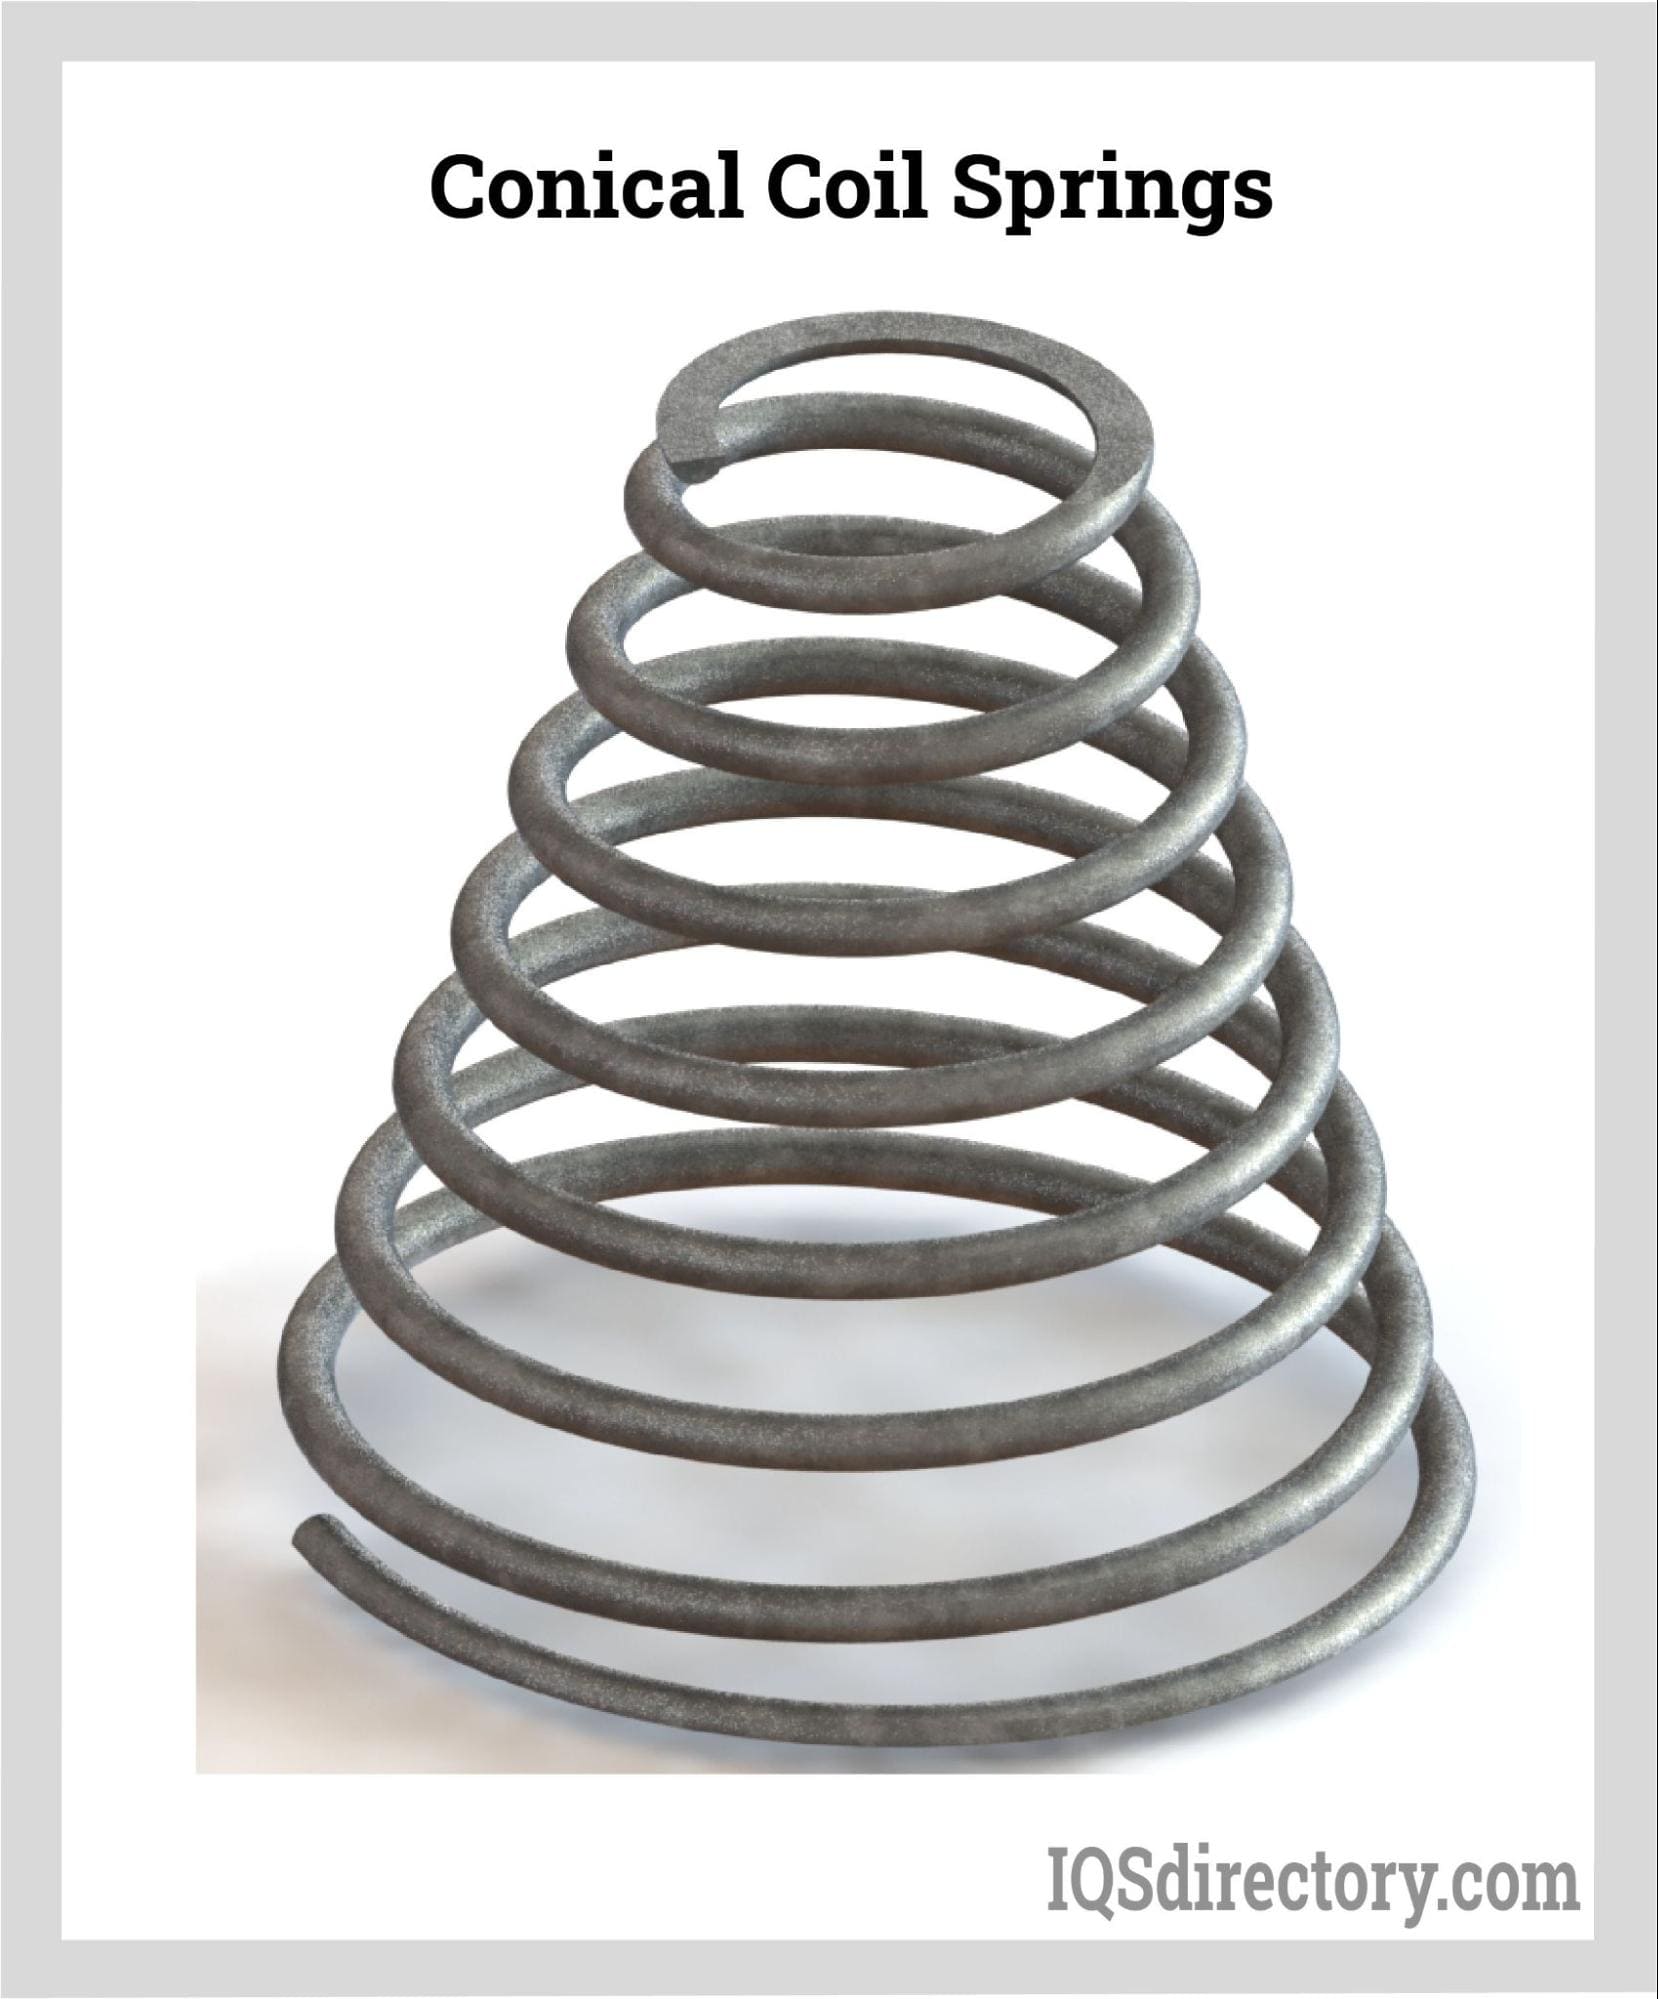 Conical Coil Springs